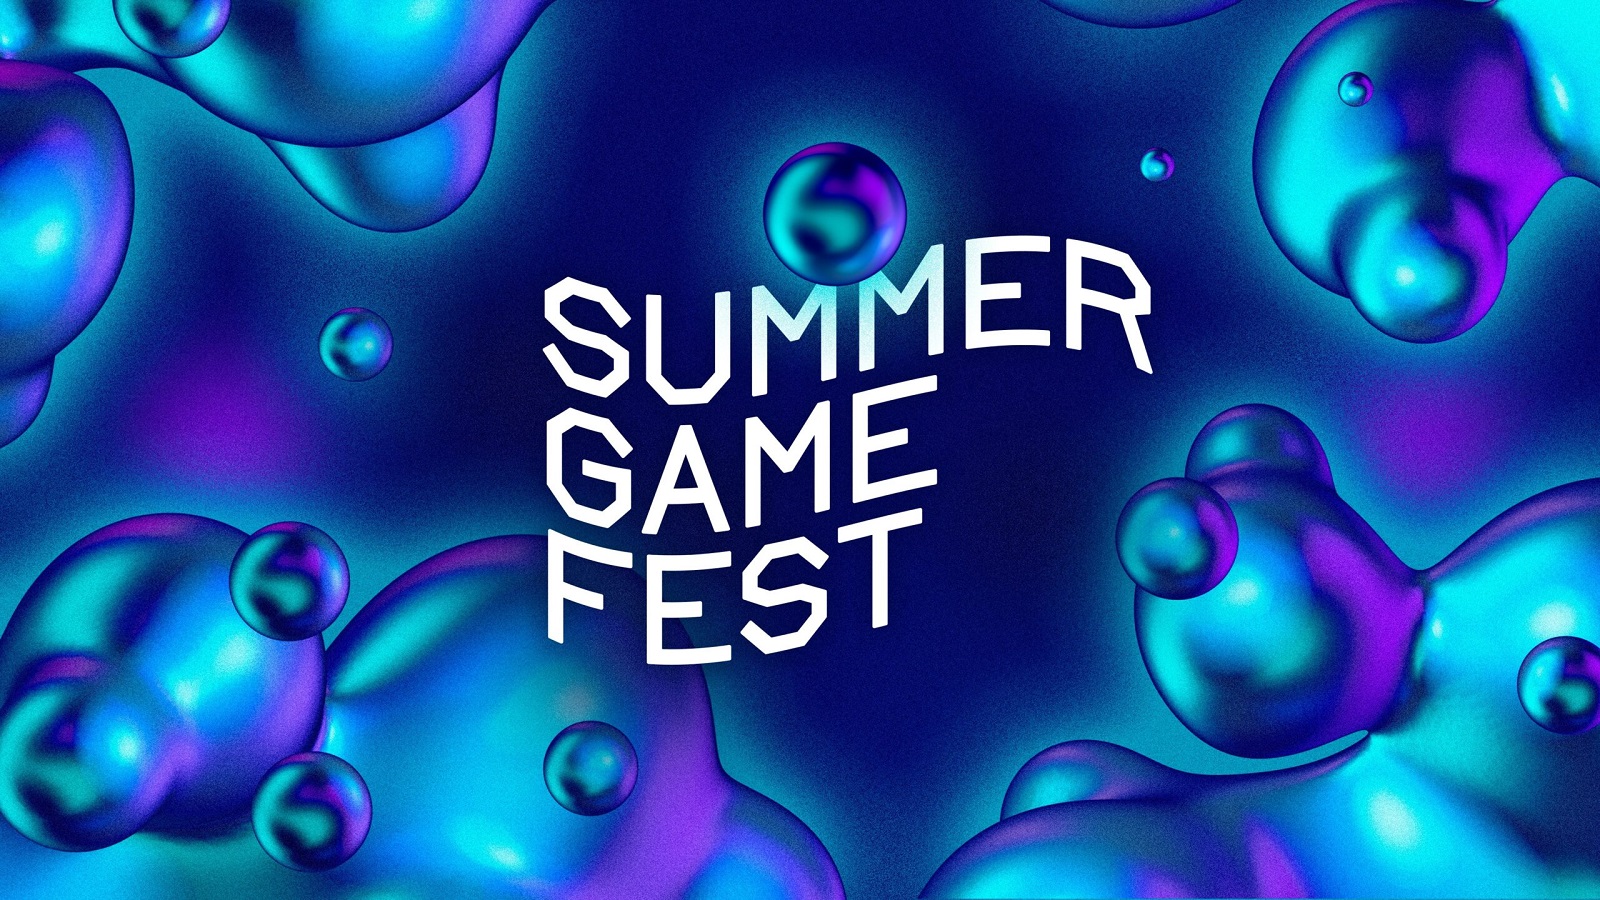 Summer Game Fest 2022 reveals line-up of participating companies